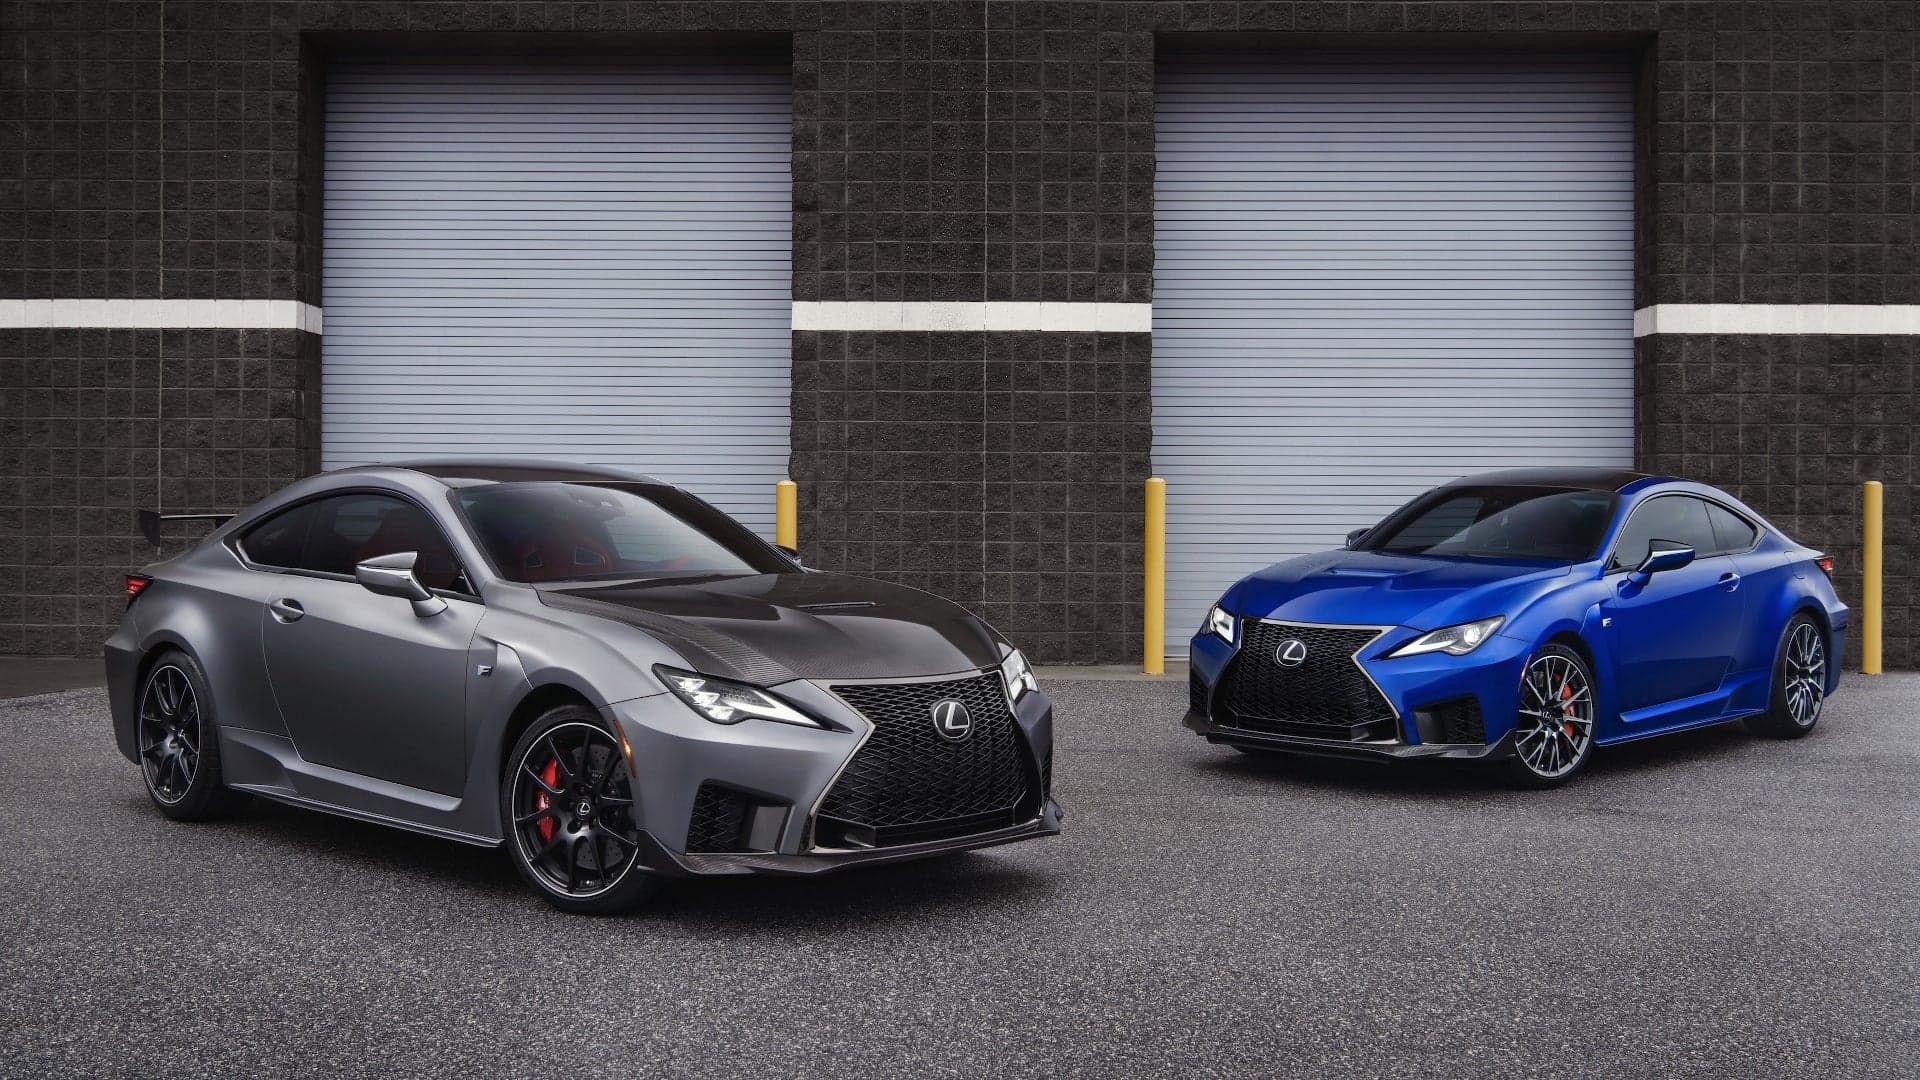 2020 Lexus RC F: New Track Edition Turns Up the Heat, Brings Down the Weight